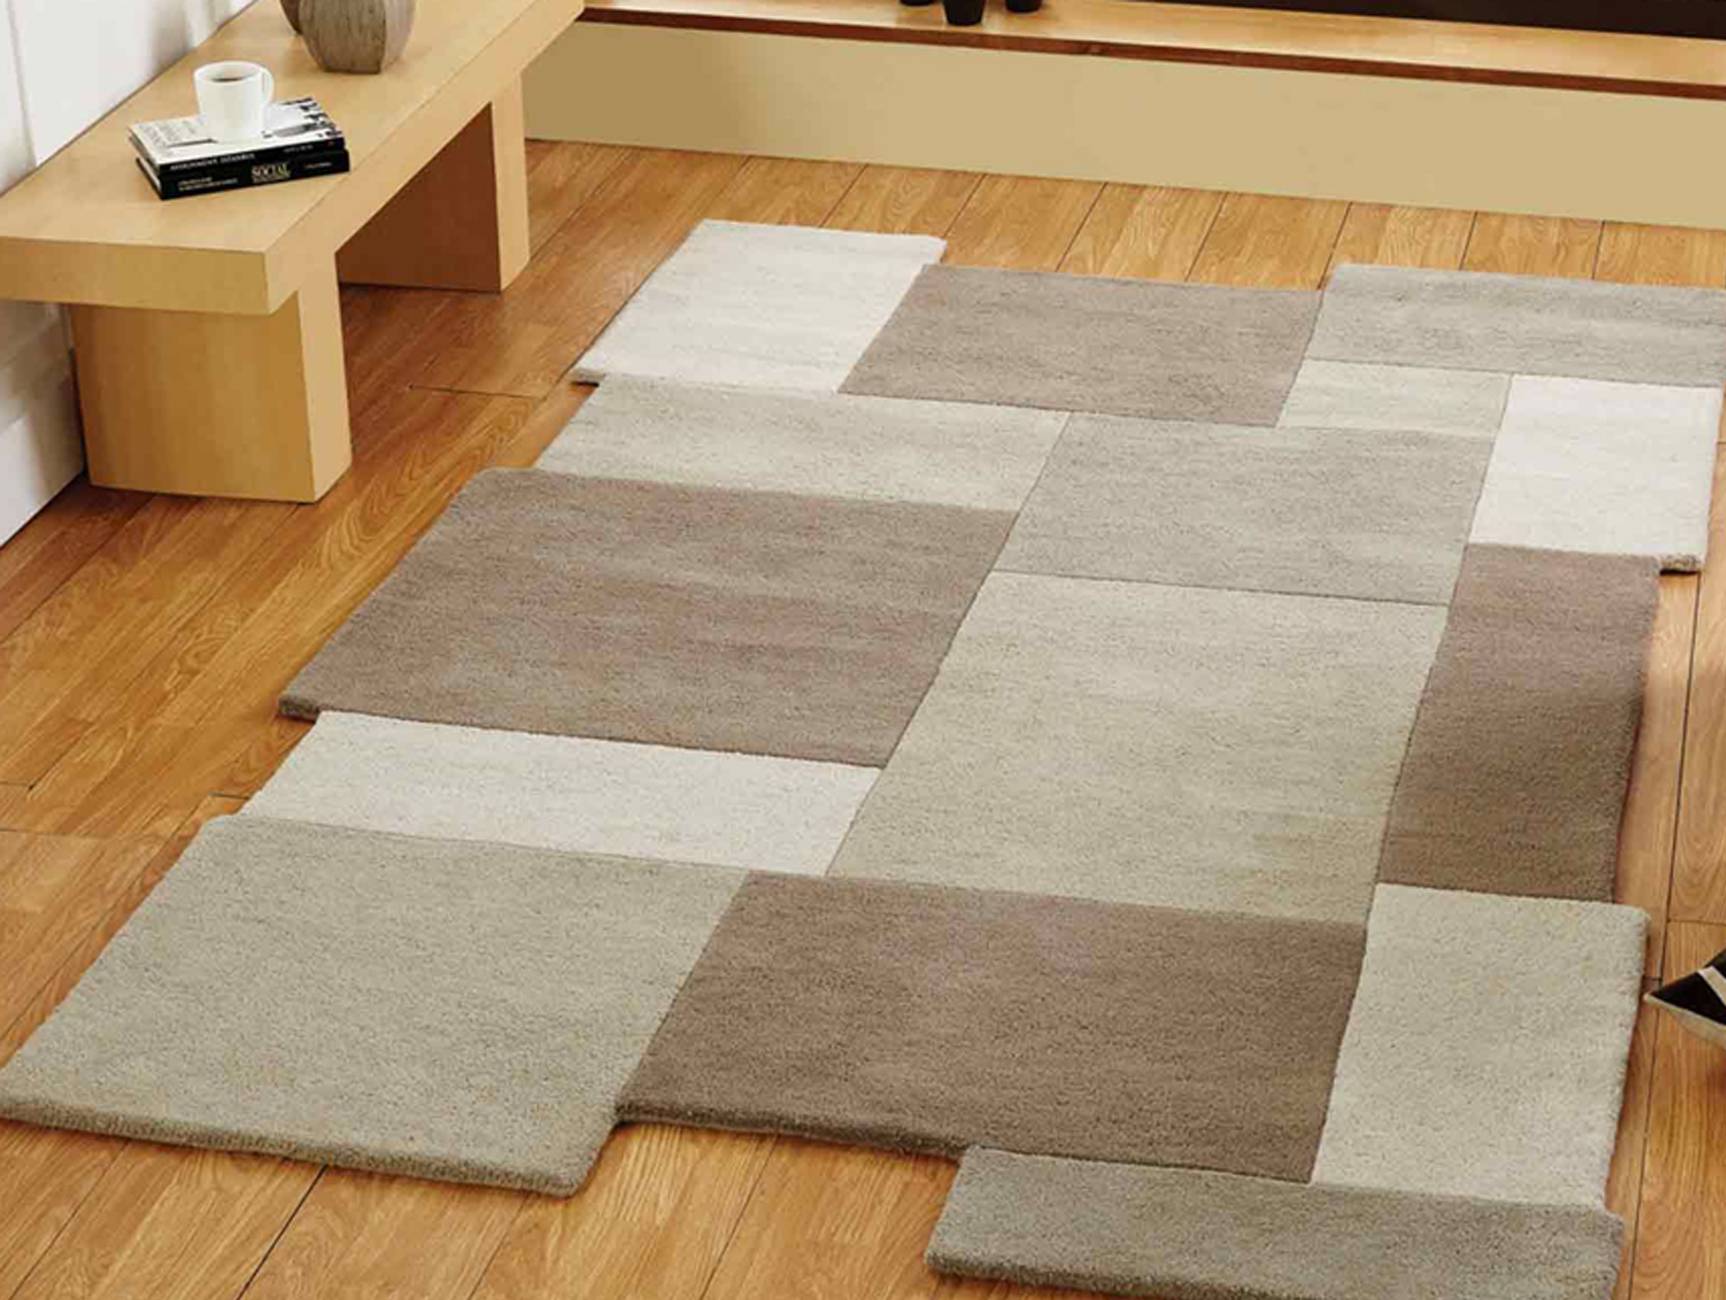 Which Are the Best Rug Types in Trend?